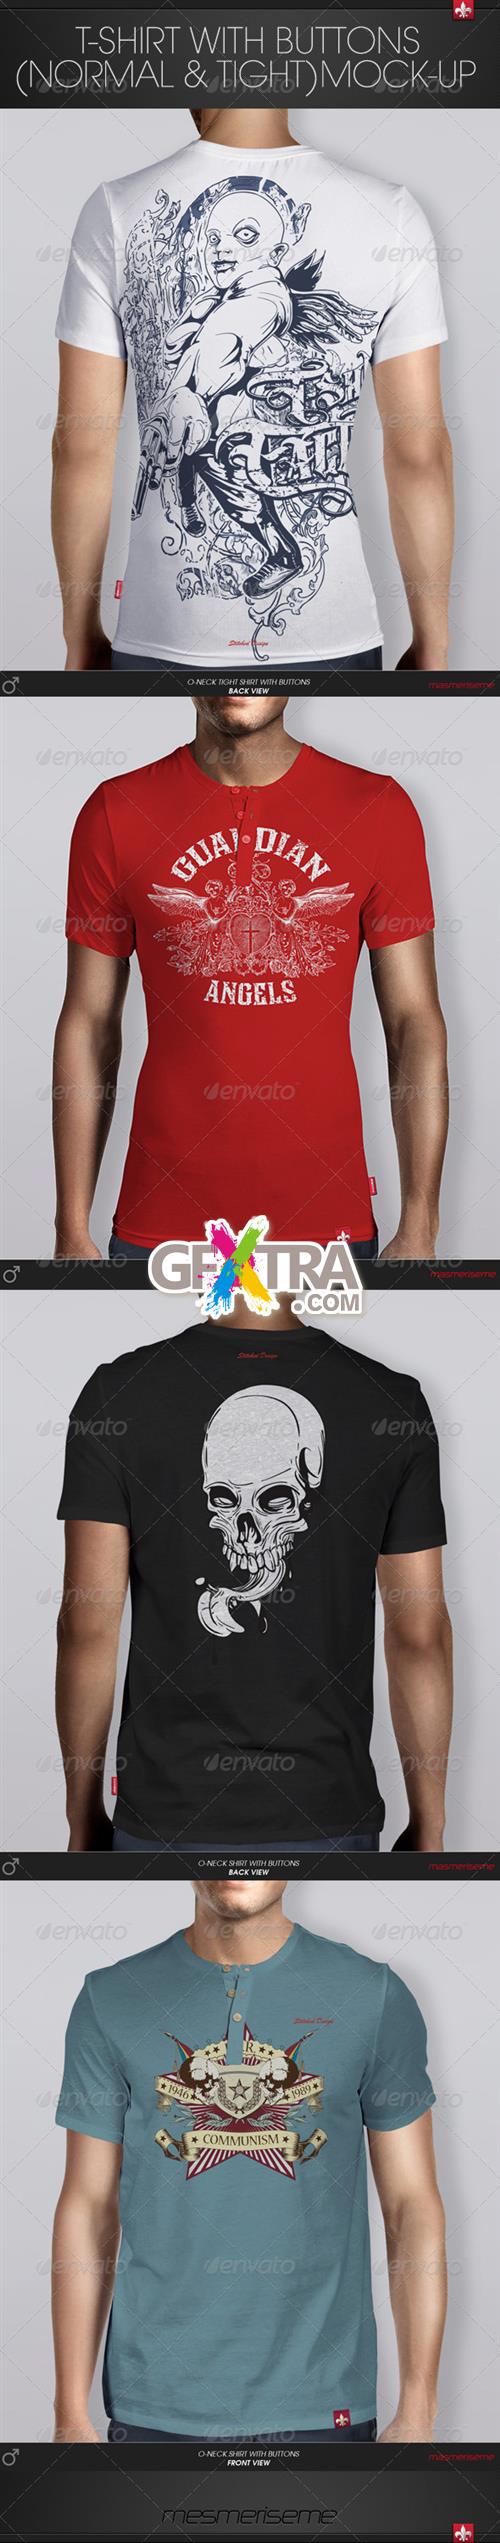 GraphicRiver T-Shirt with Buttons Mock-Up 6188722